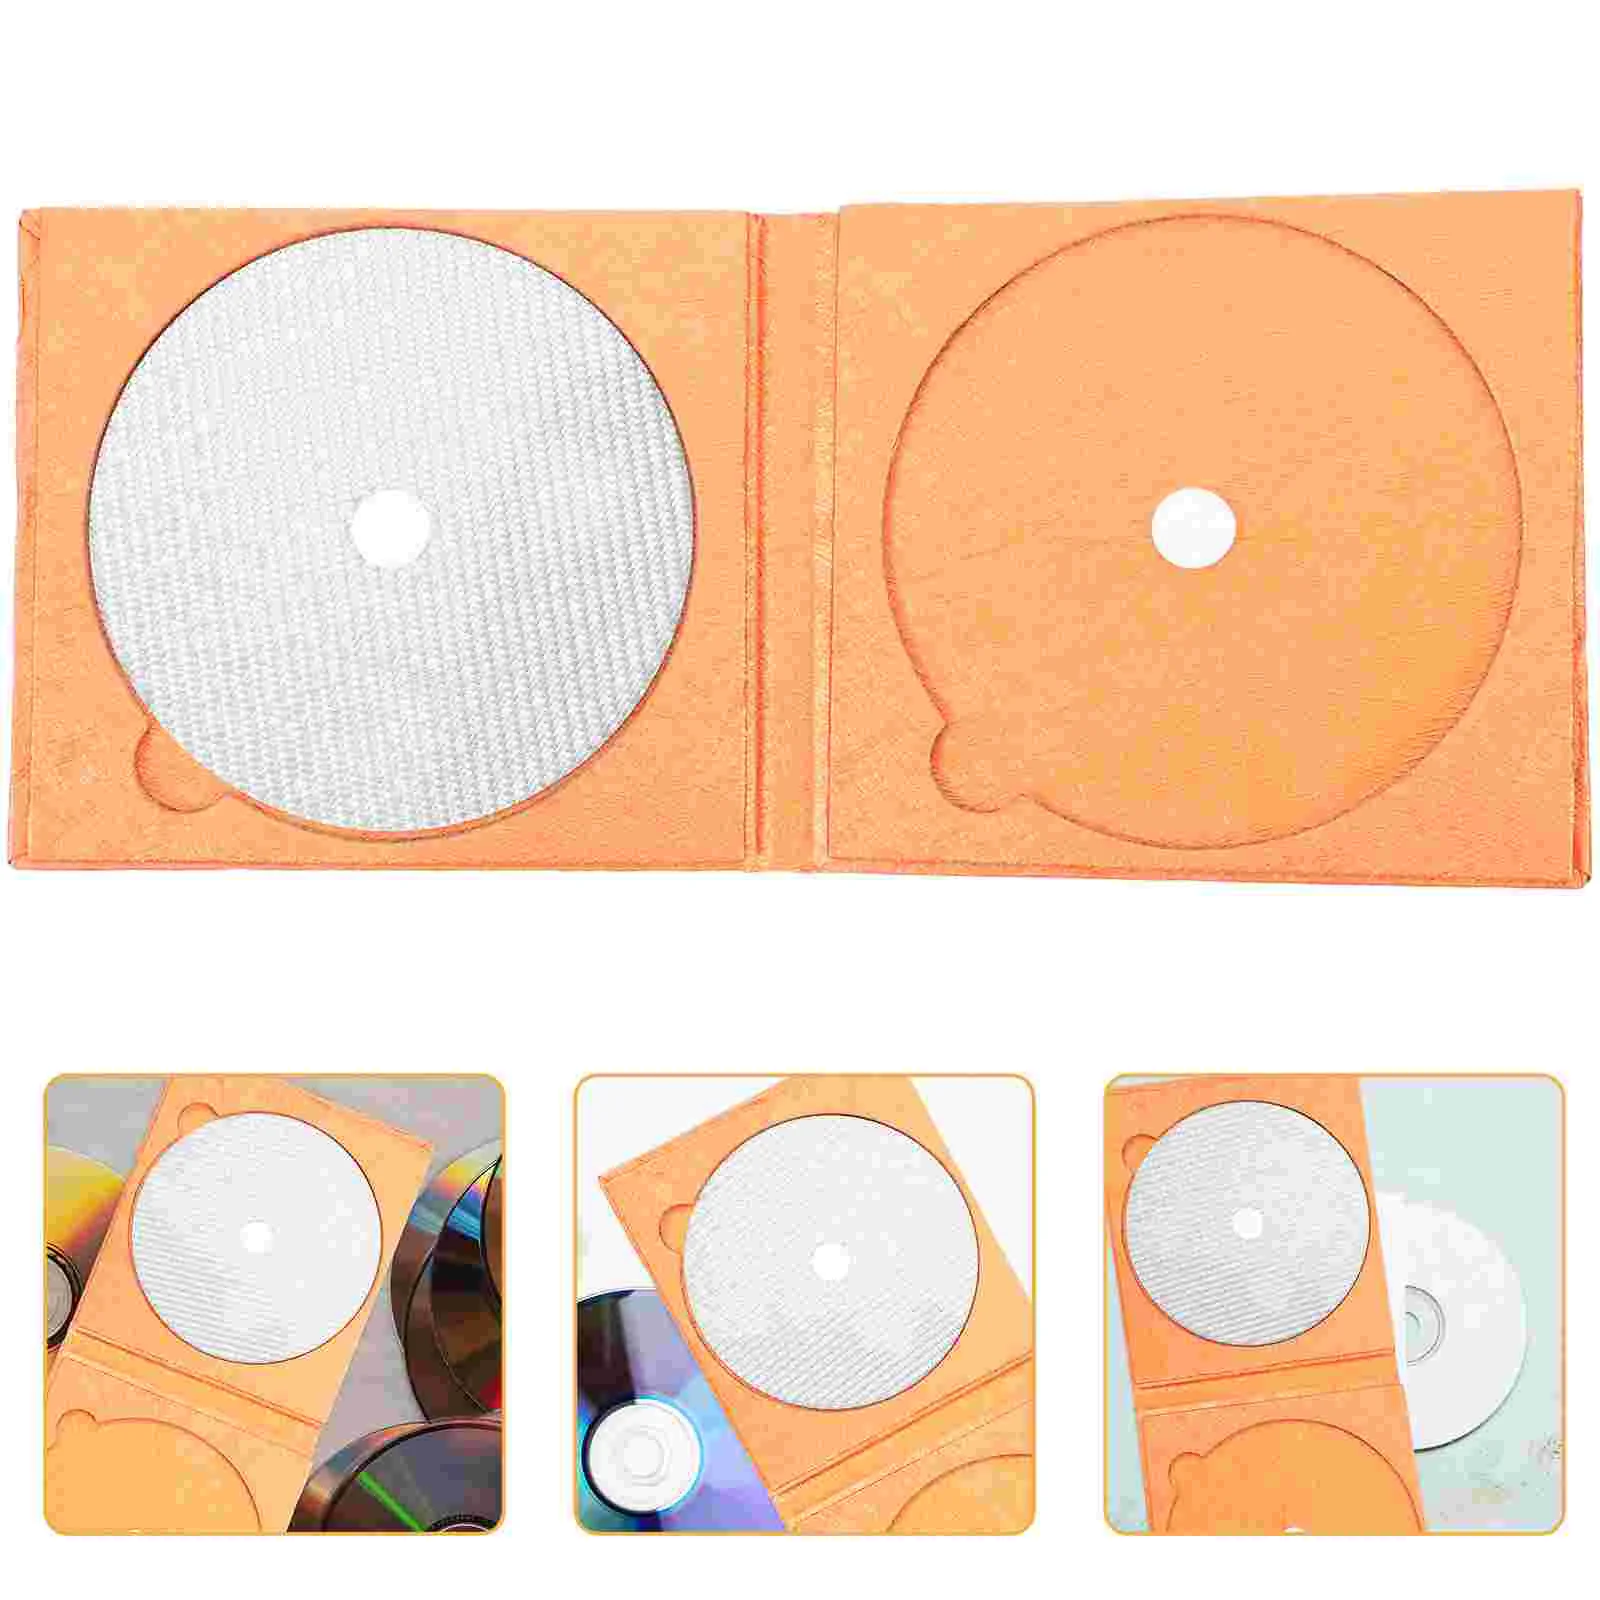 

CD DVD Tuning Pad Carbon Fiber CD Tuning Mat Professional Discs Stabilizer for CD Player